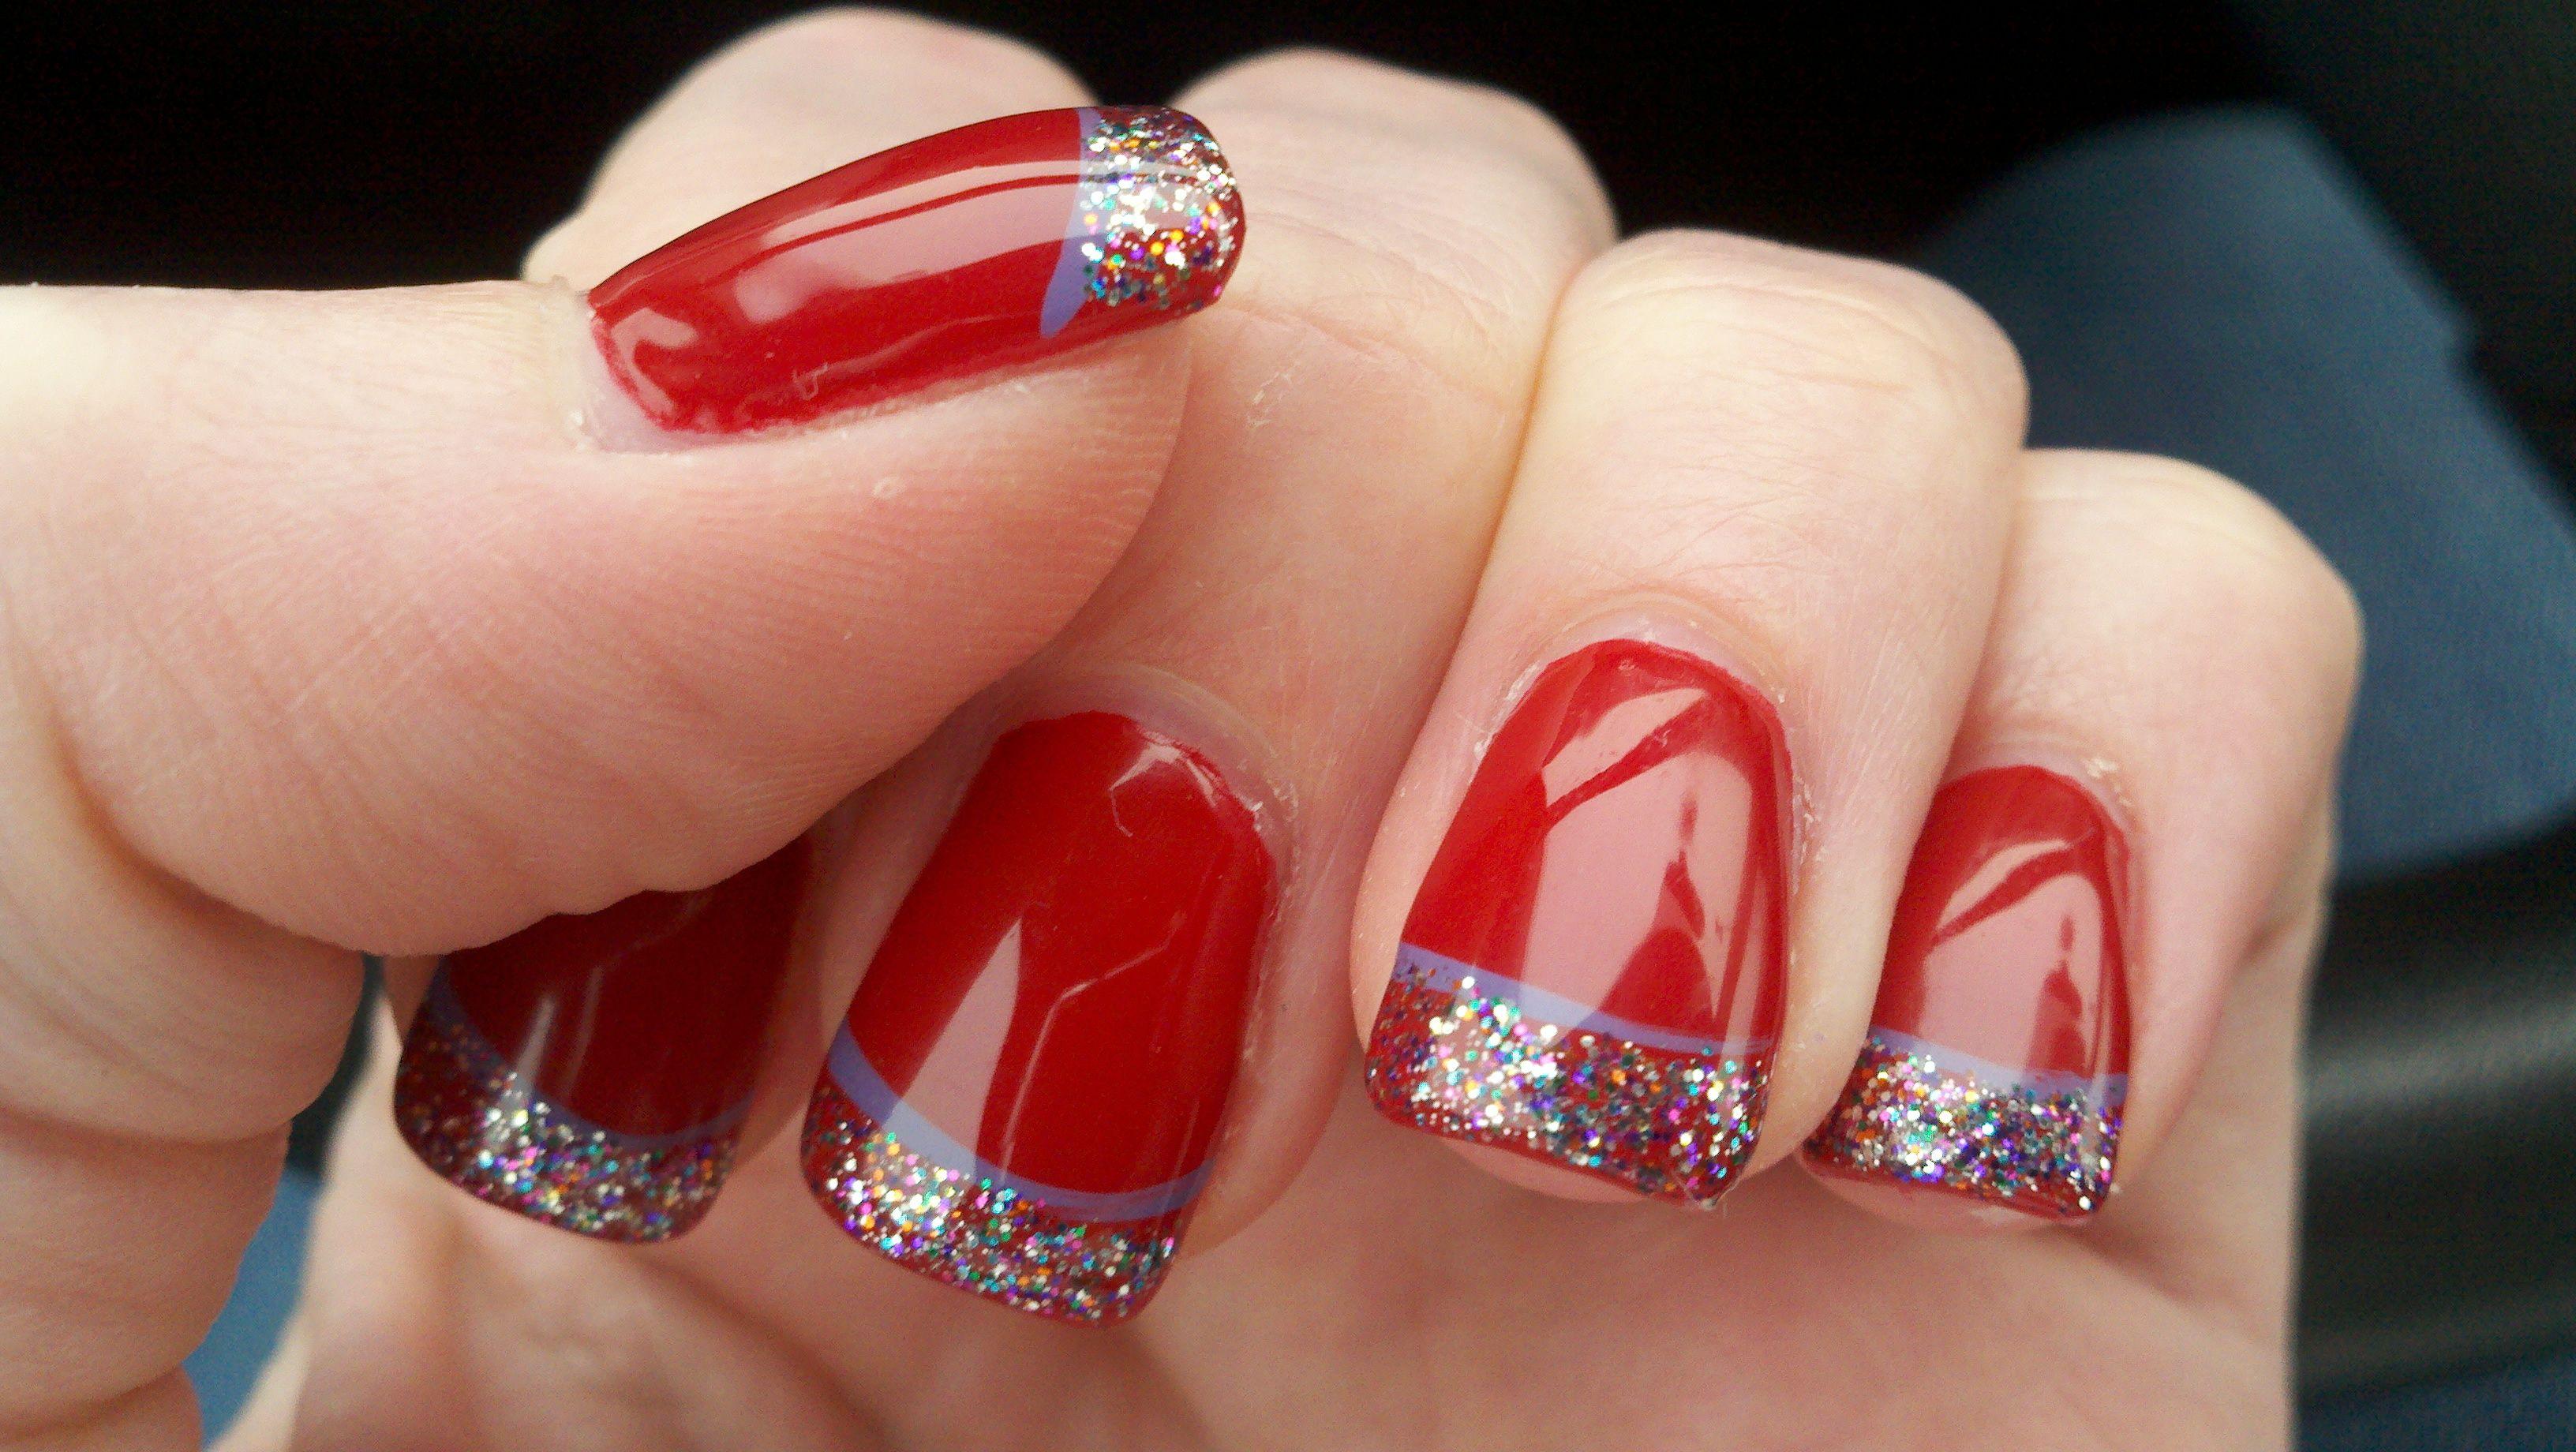 Red Nail Art Gallery - 30 Bold and Beautiful Red Nail Designs - wide 3